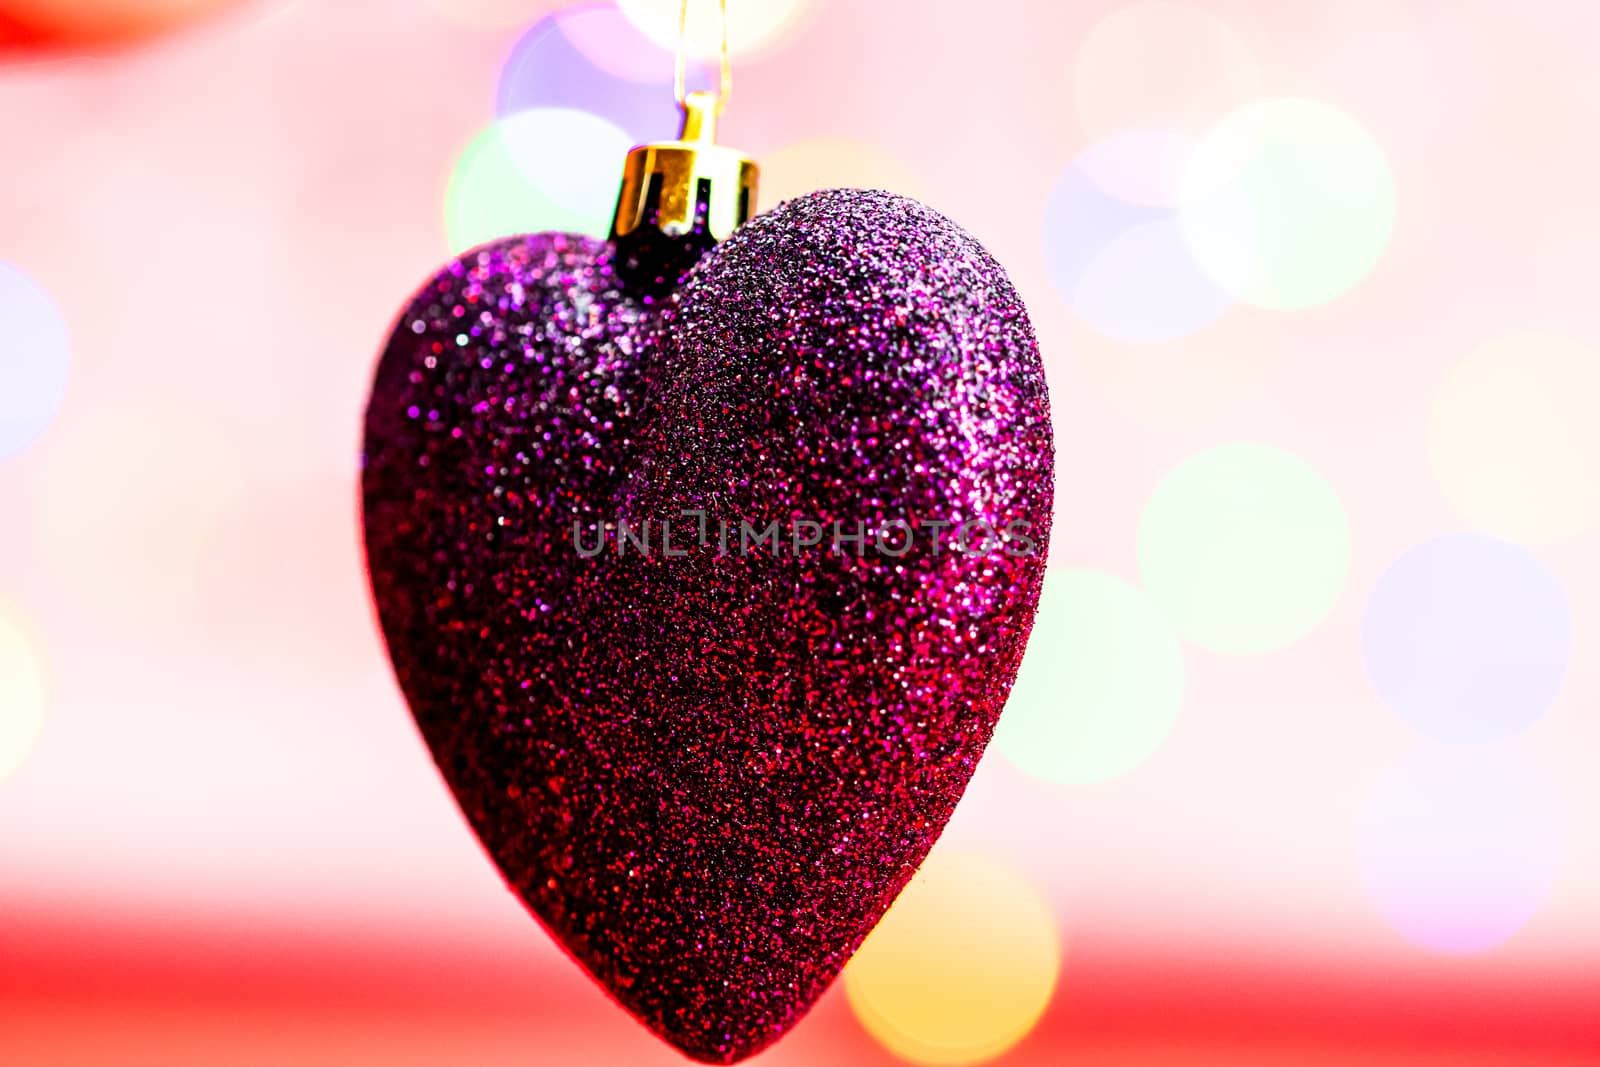 Heart shaped Christmas decoration isolated on blurred background by vladispas